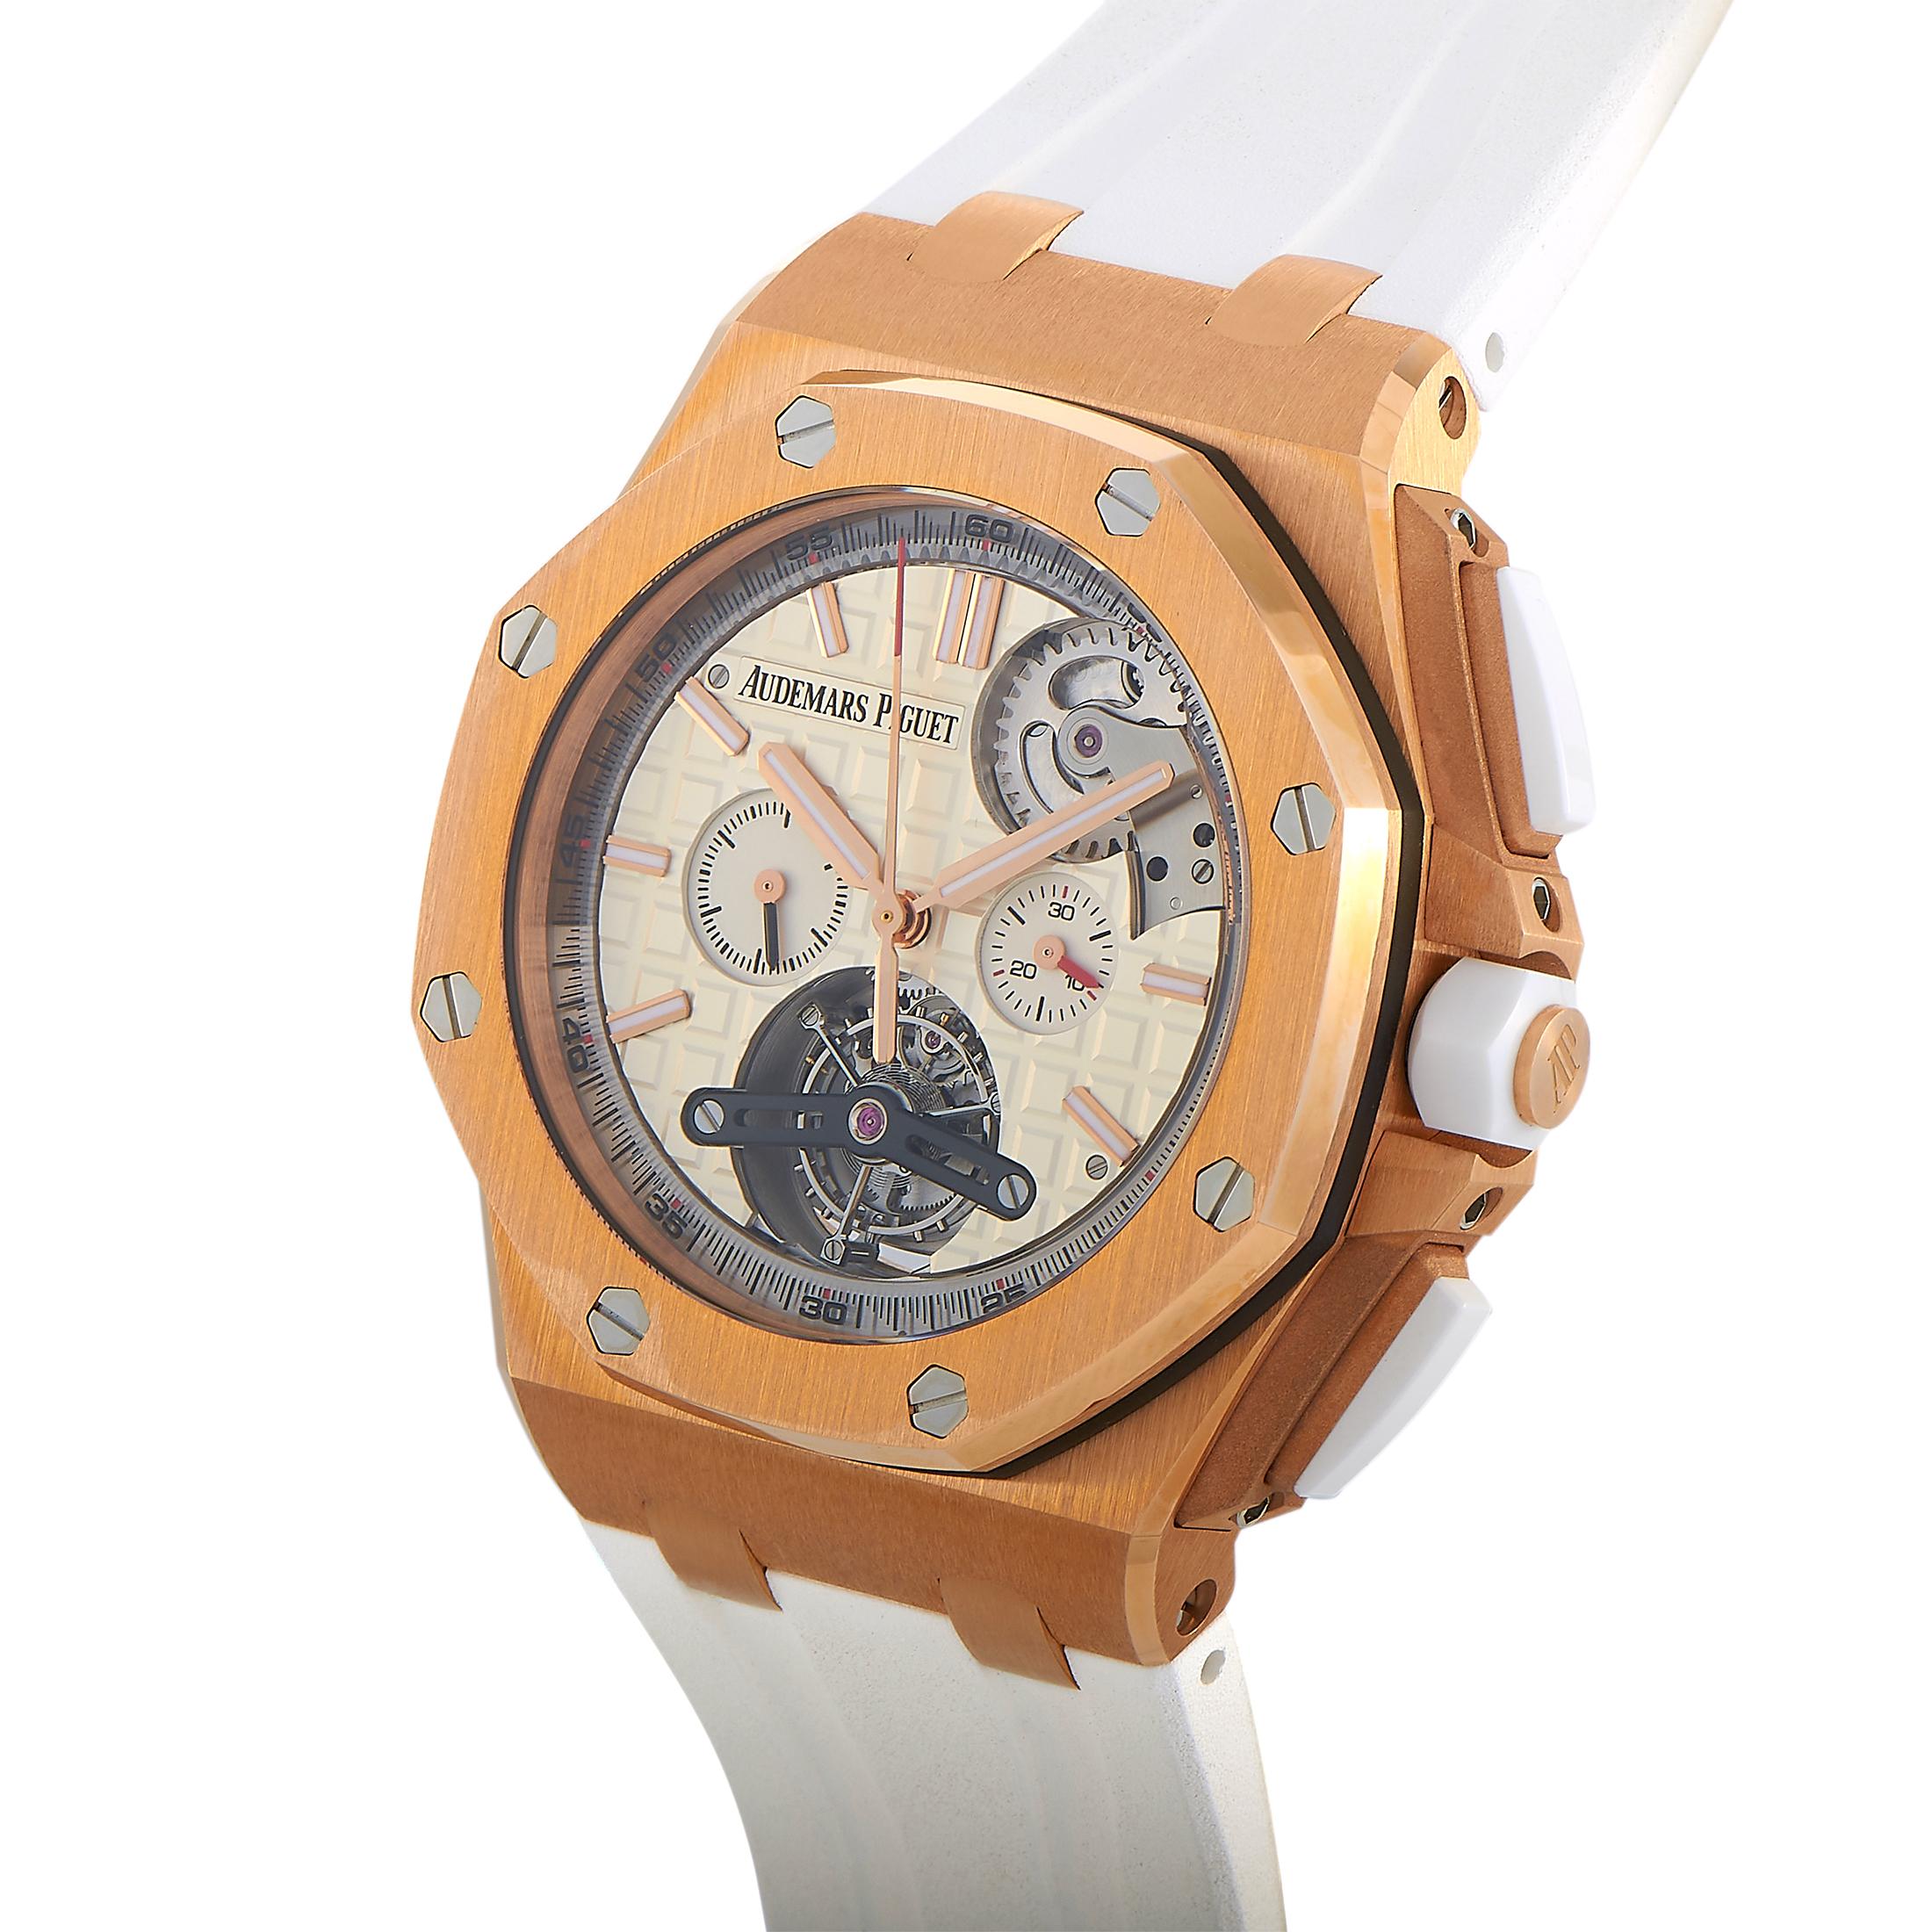 The Audemars Piguet Royal Oak Offshore Tourbillon Chronograph Selfwinding, reference number 26540OR.OO.A010CA.01, is created for the exquisite “Royal Oak Offshore” collection.

The watch is presented with an 18K rose gold case that boasts